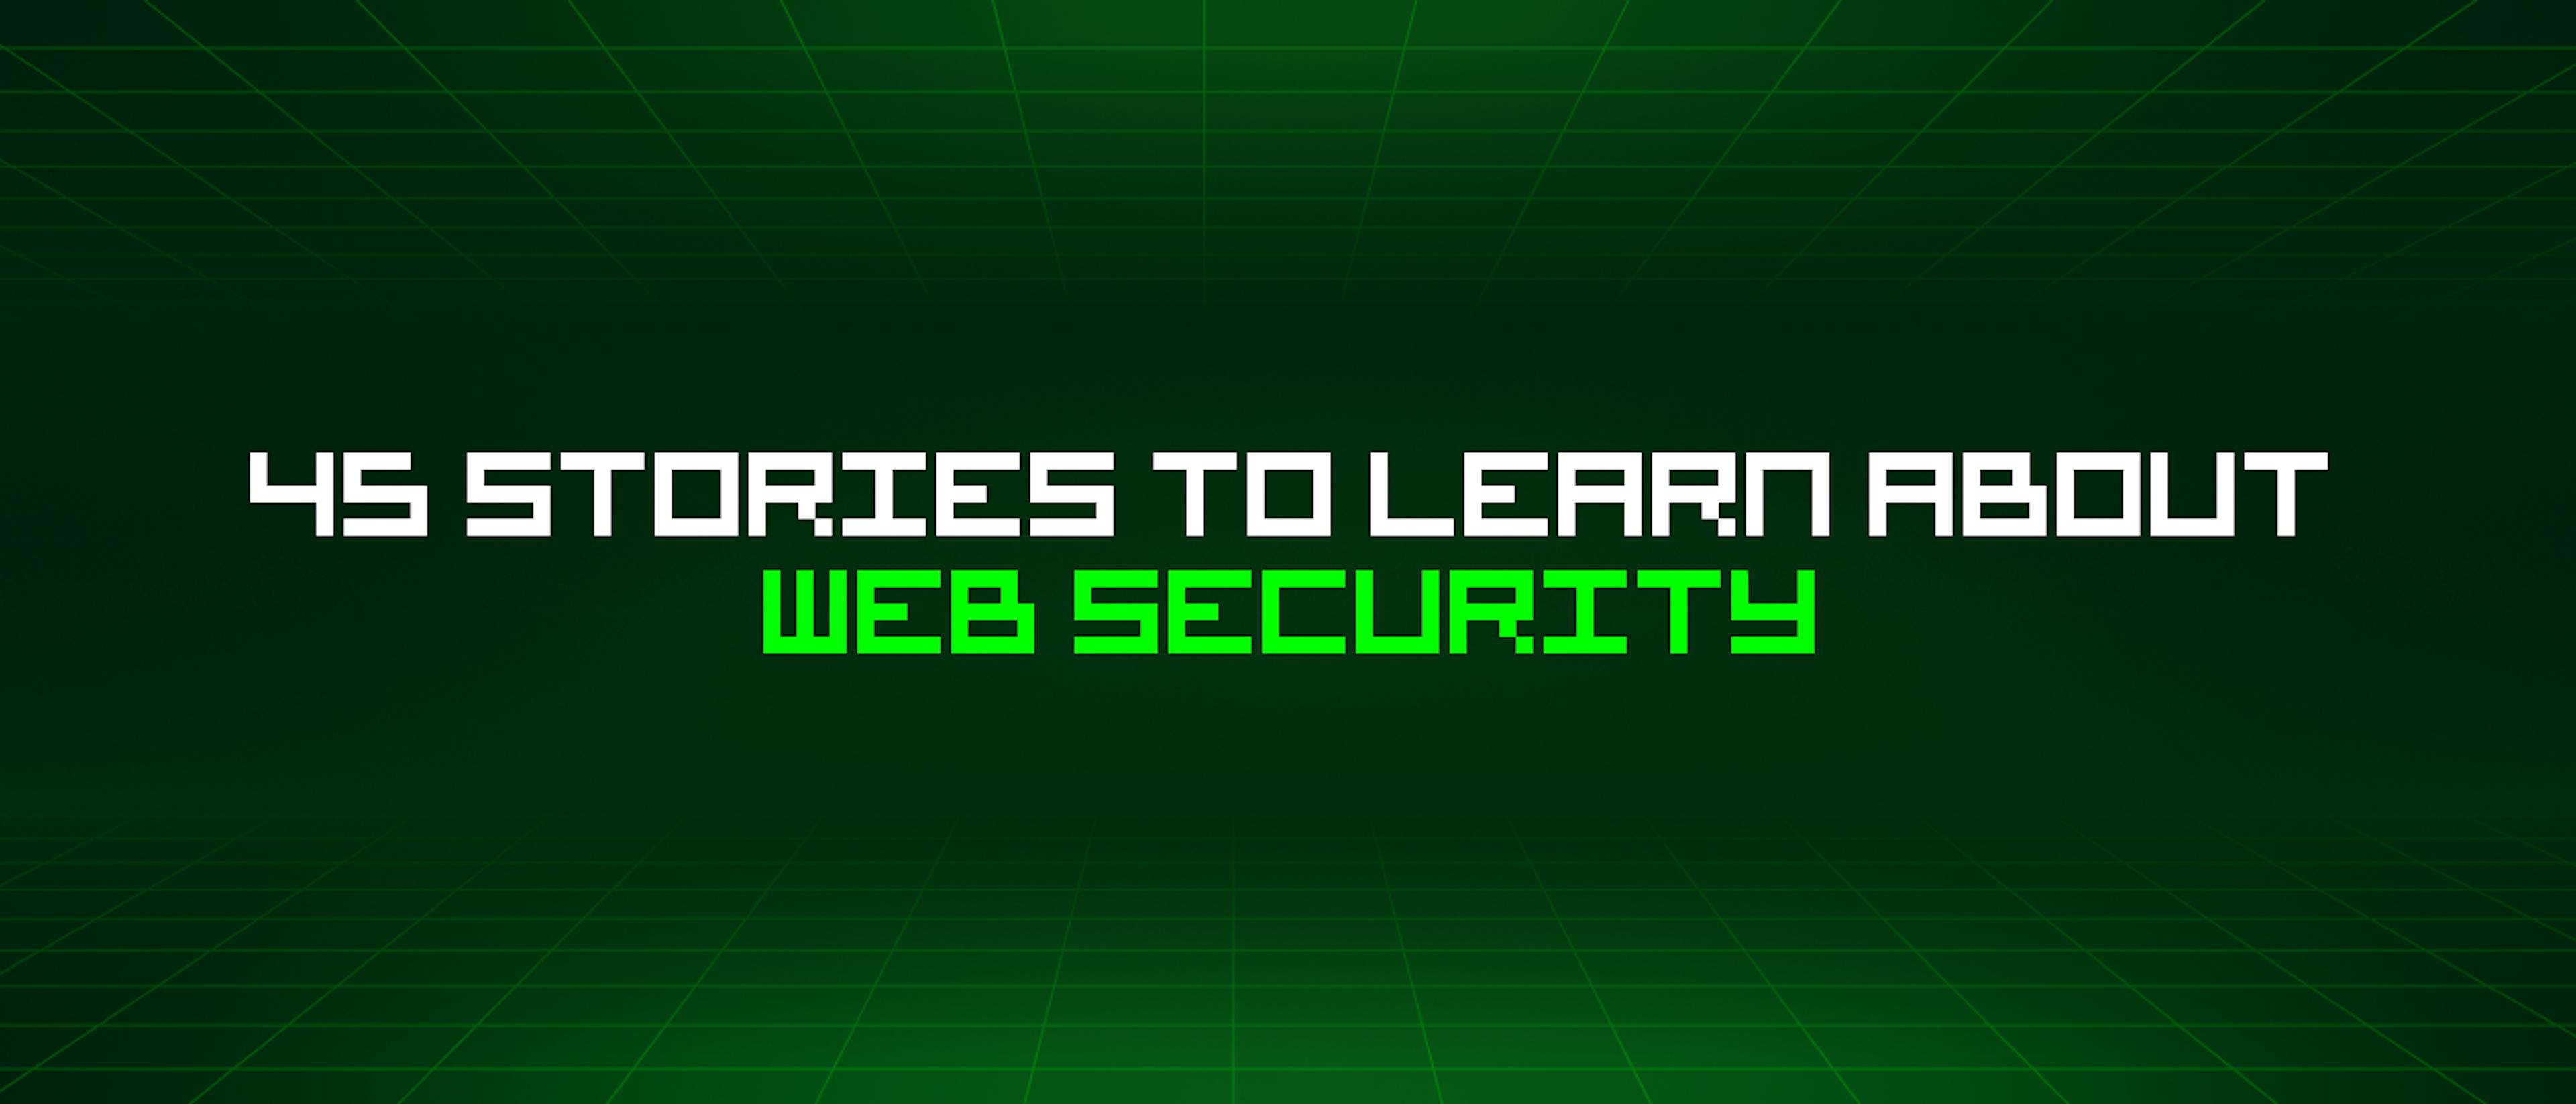 featured image - 45 Stories To Learn About Web Security